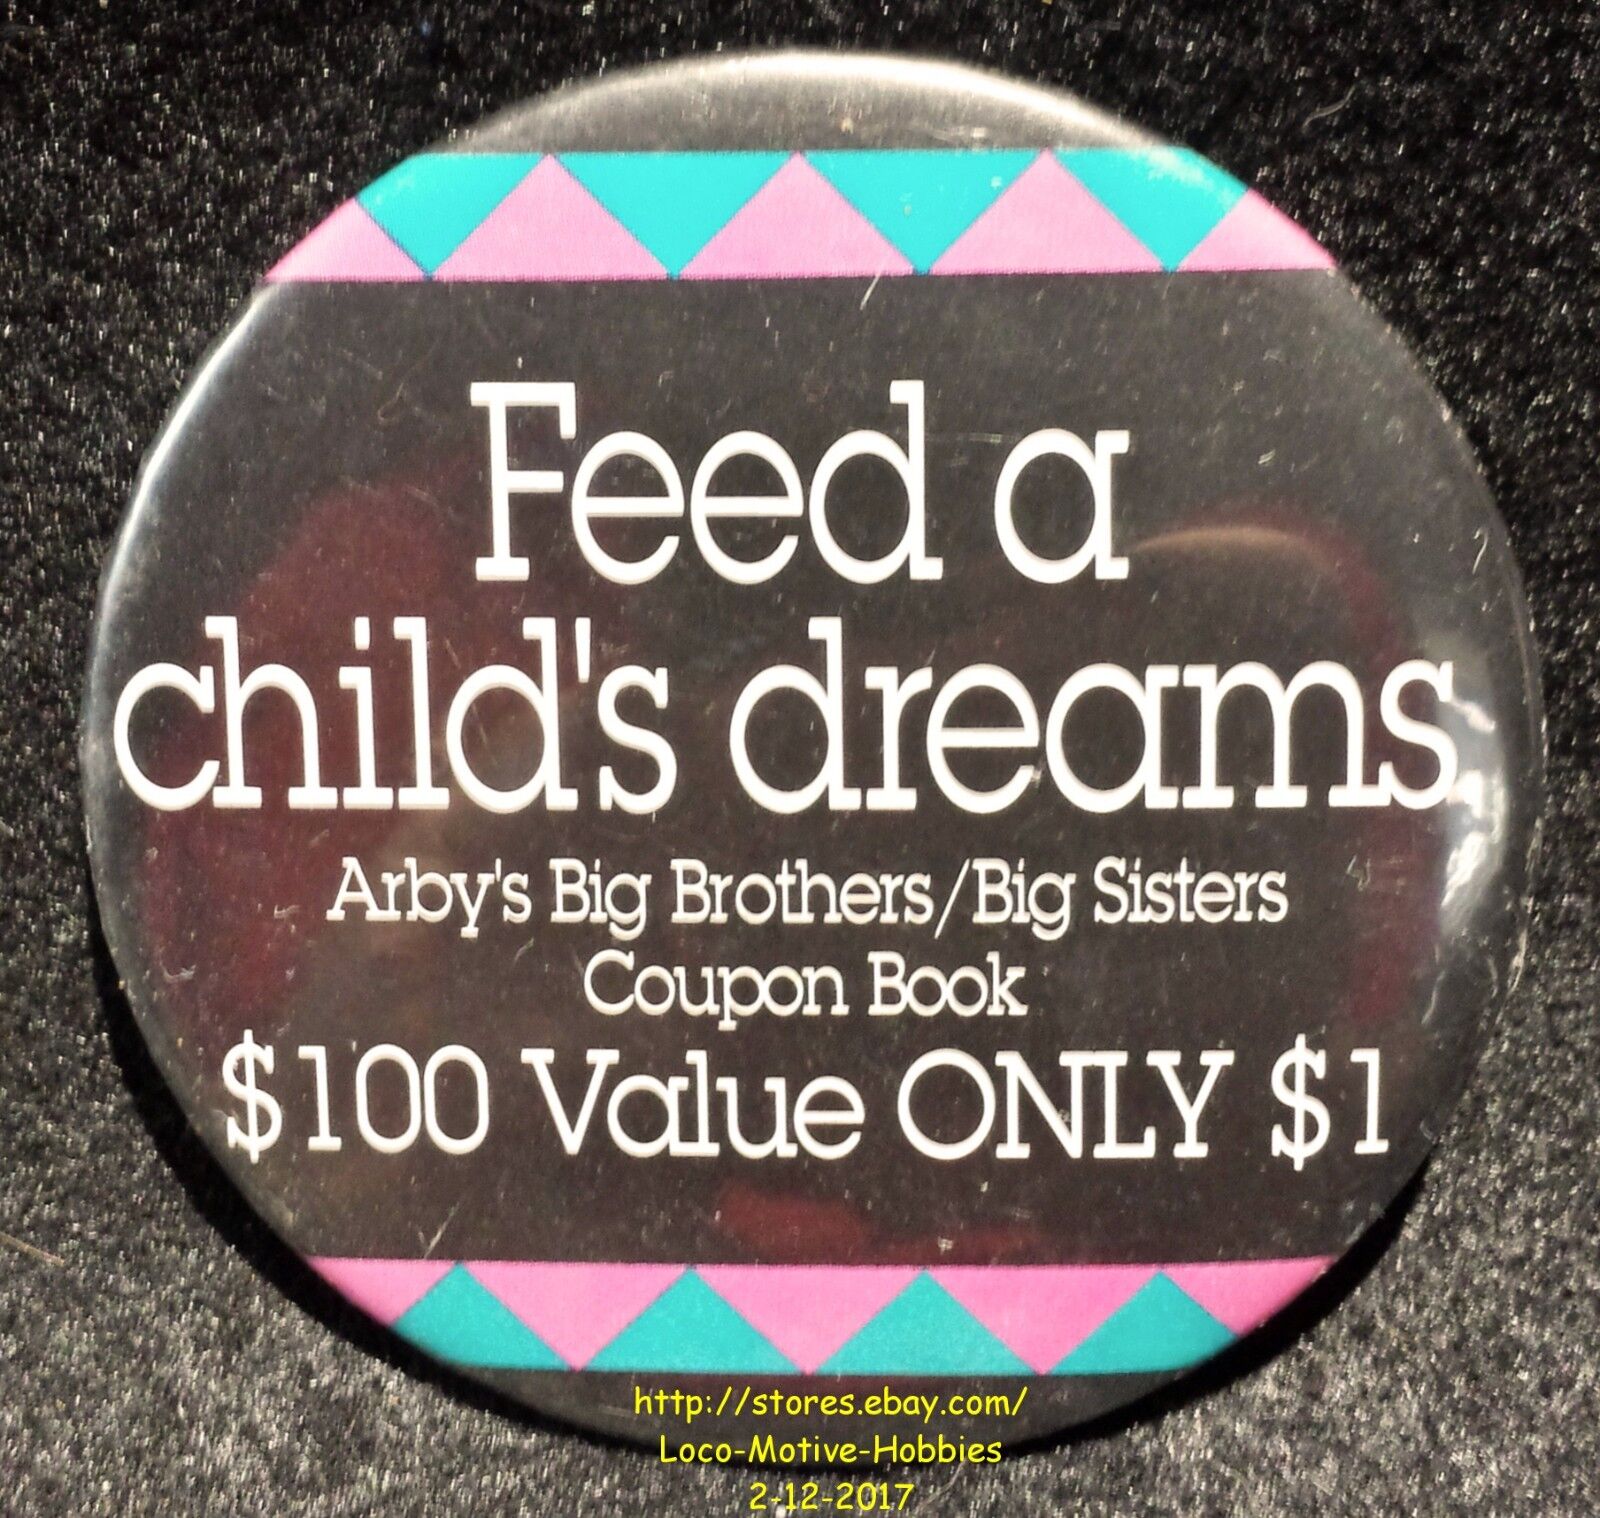 LMH PINBACK Button Pin ARBY's Promo  FEED A CHILD's DREAMS  Big Brothers Sisters Unbranded